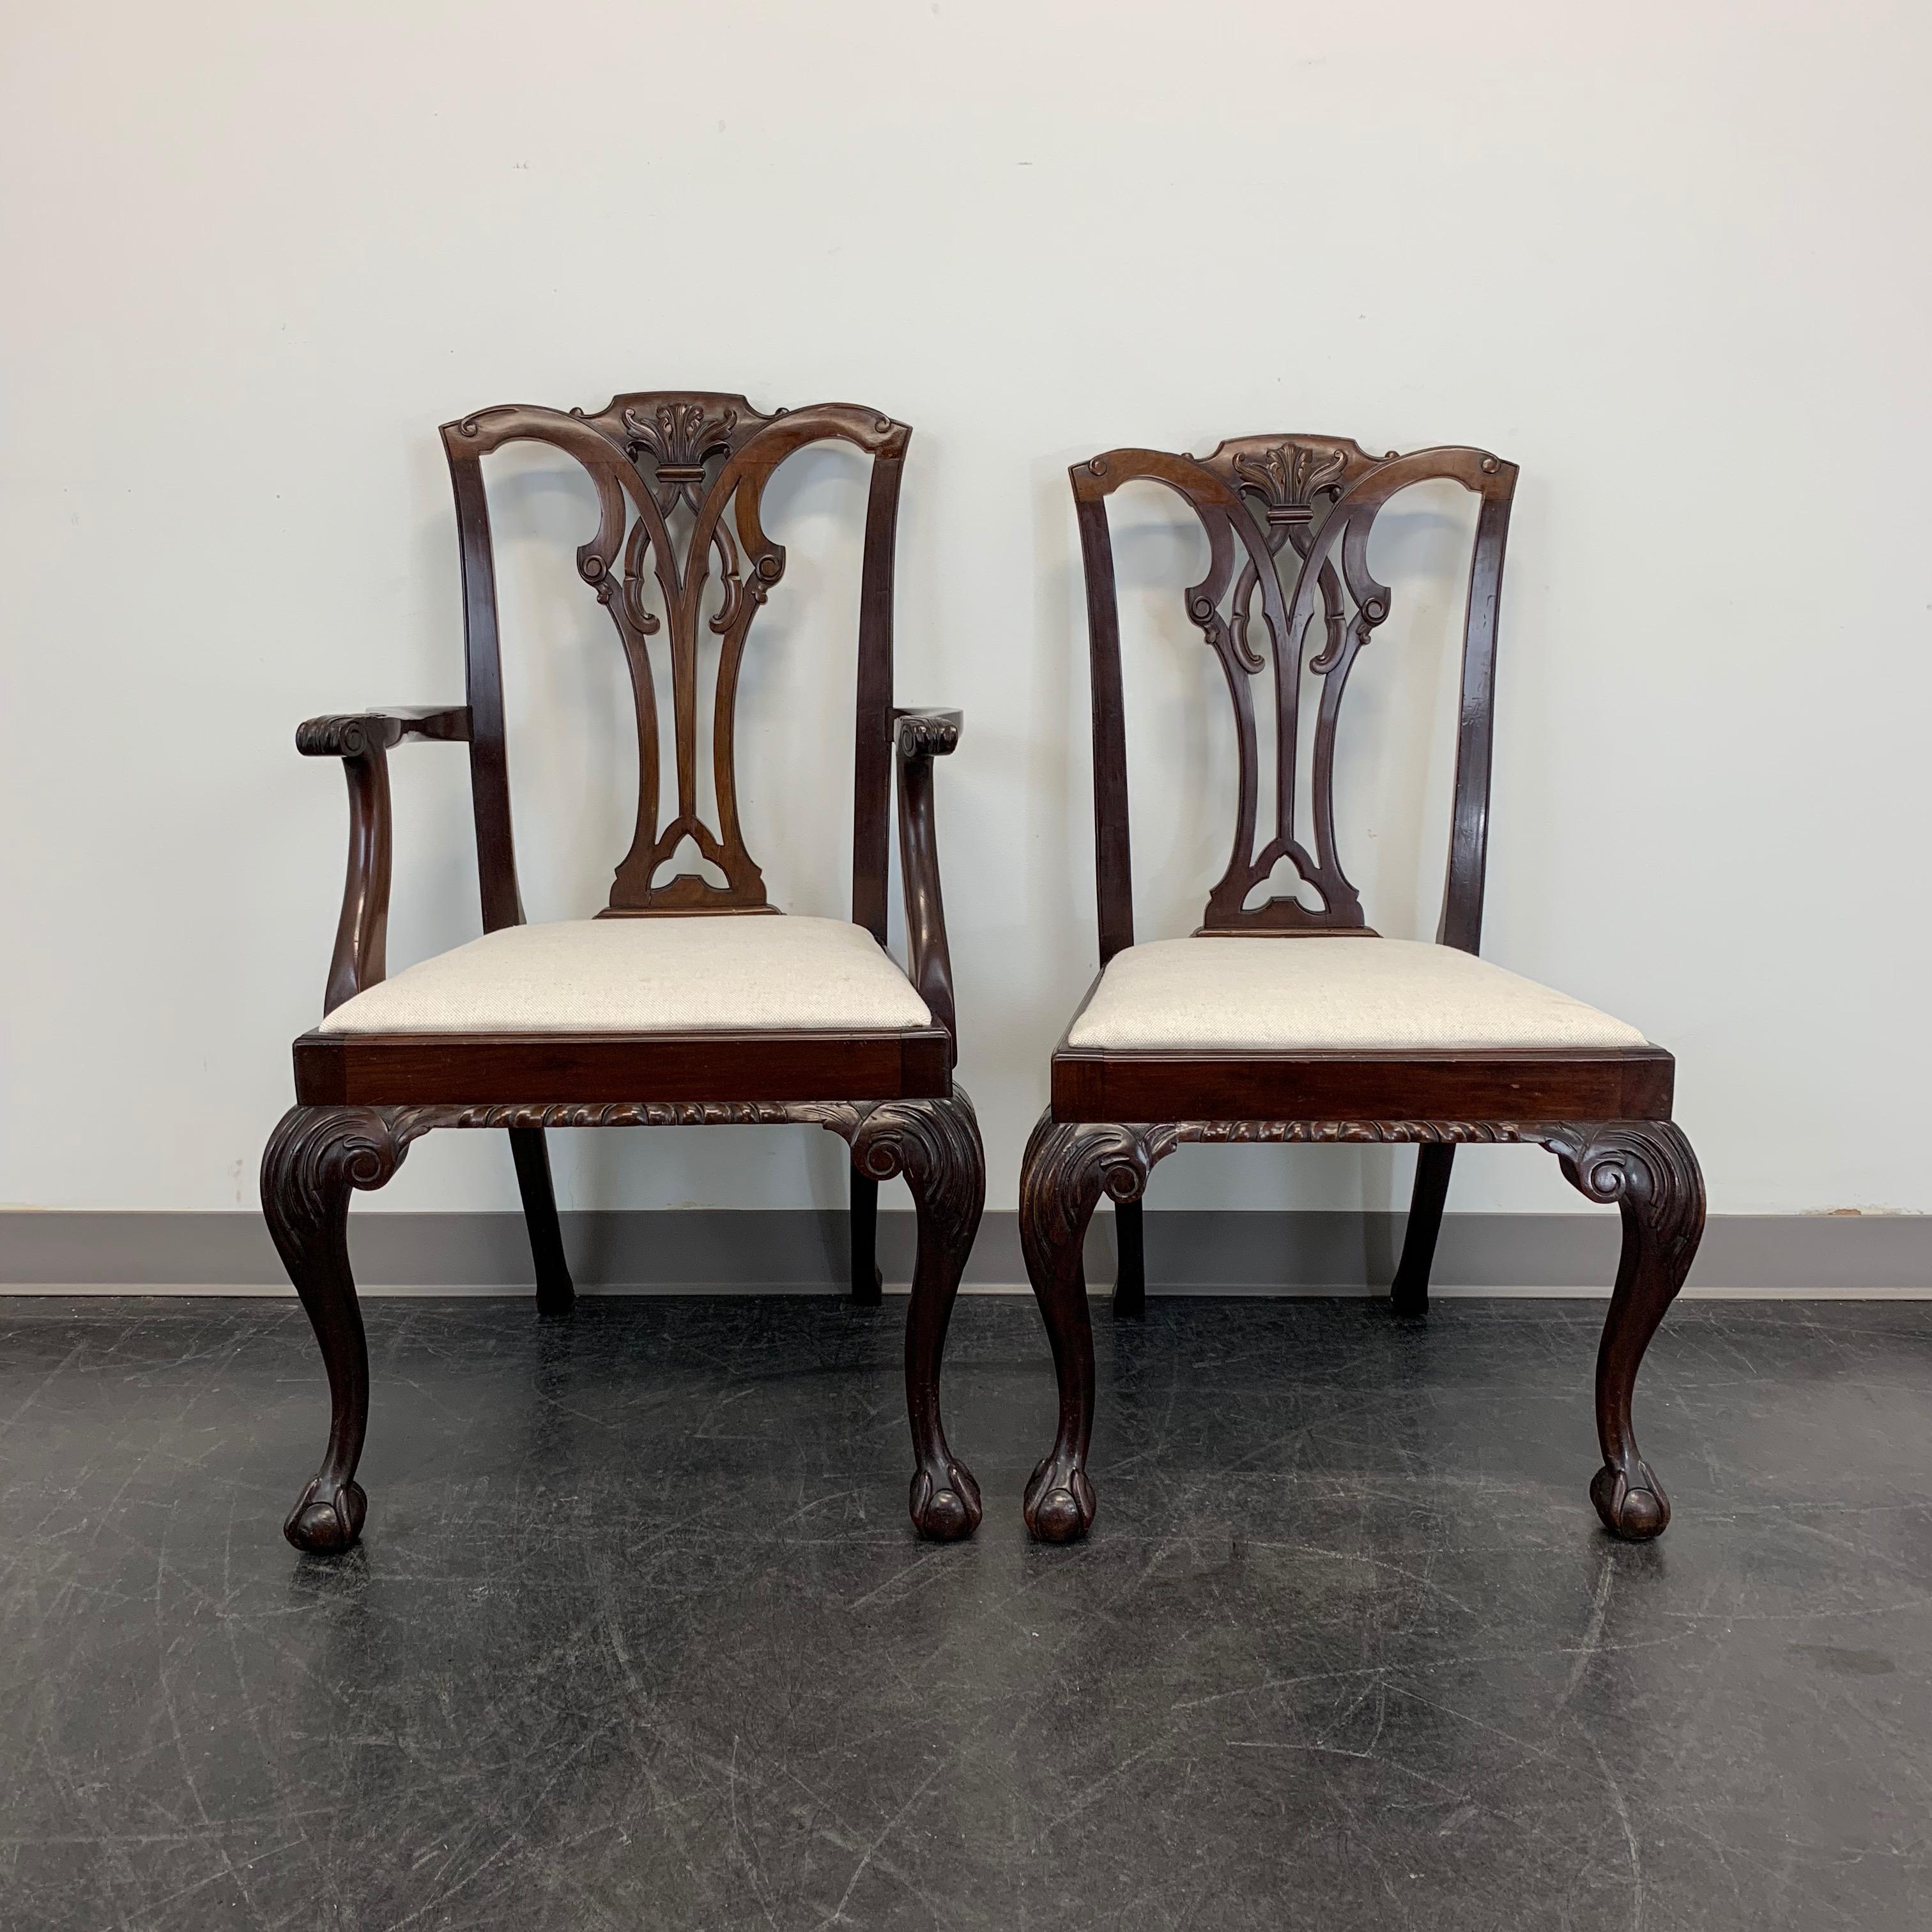 20th Century Antique Mahogany Chippendale Ball Claw Dining Chairs by Pratt Bros - Set of 6